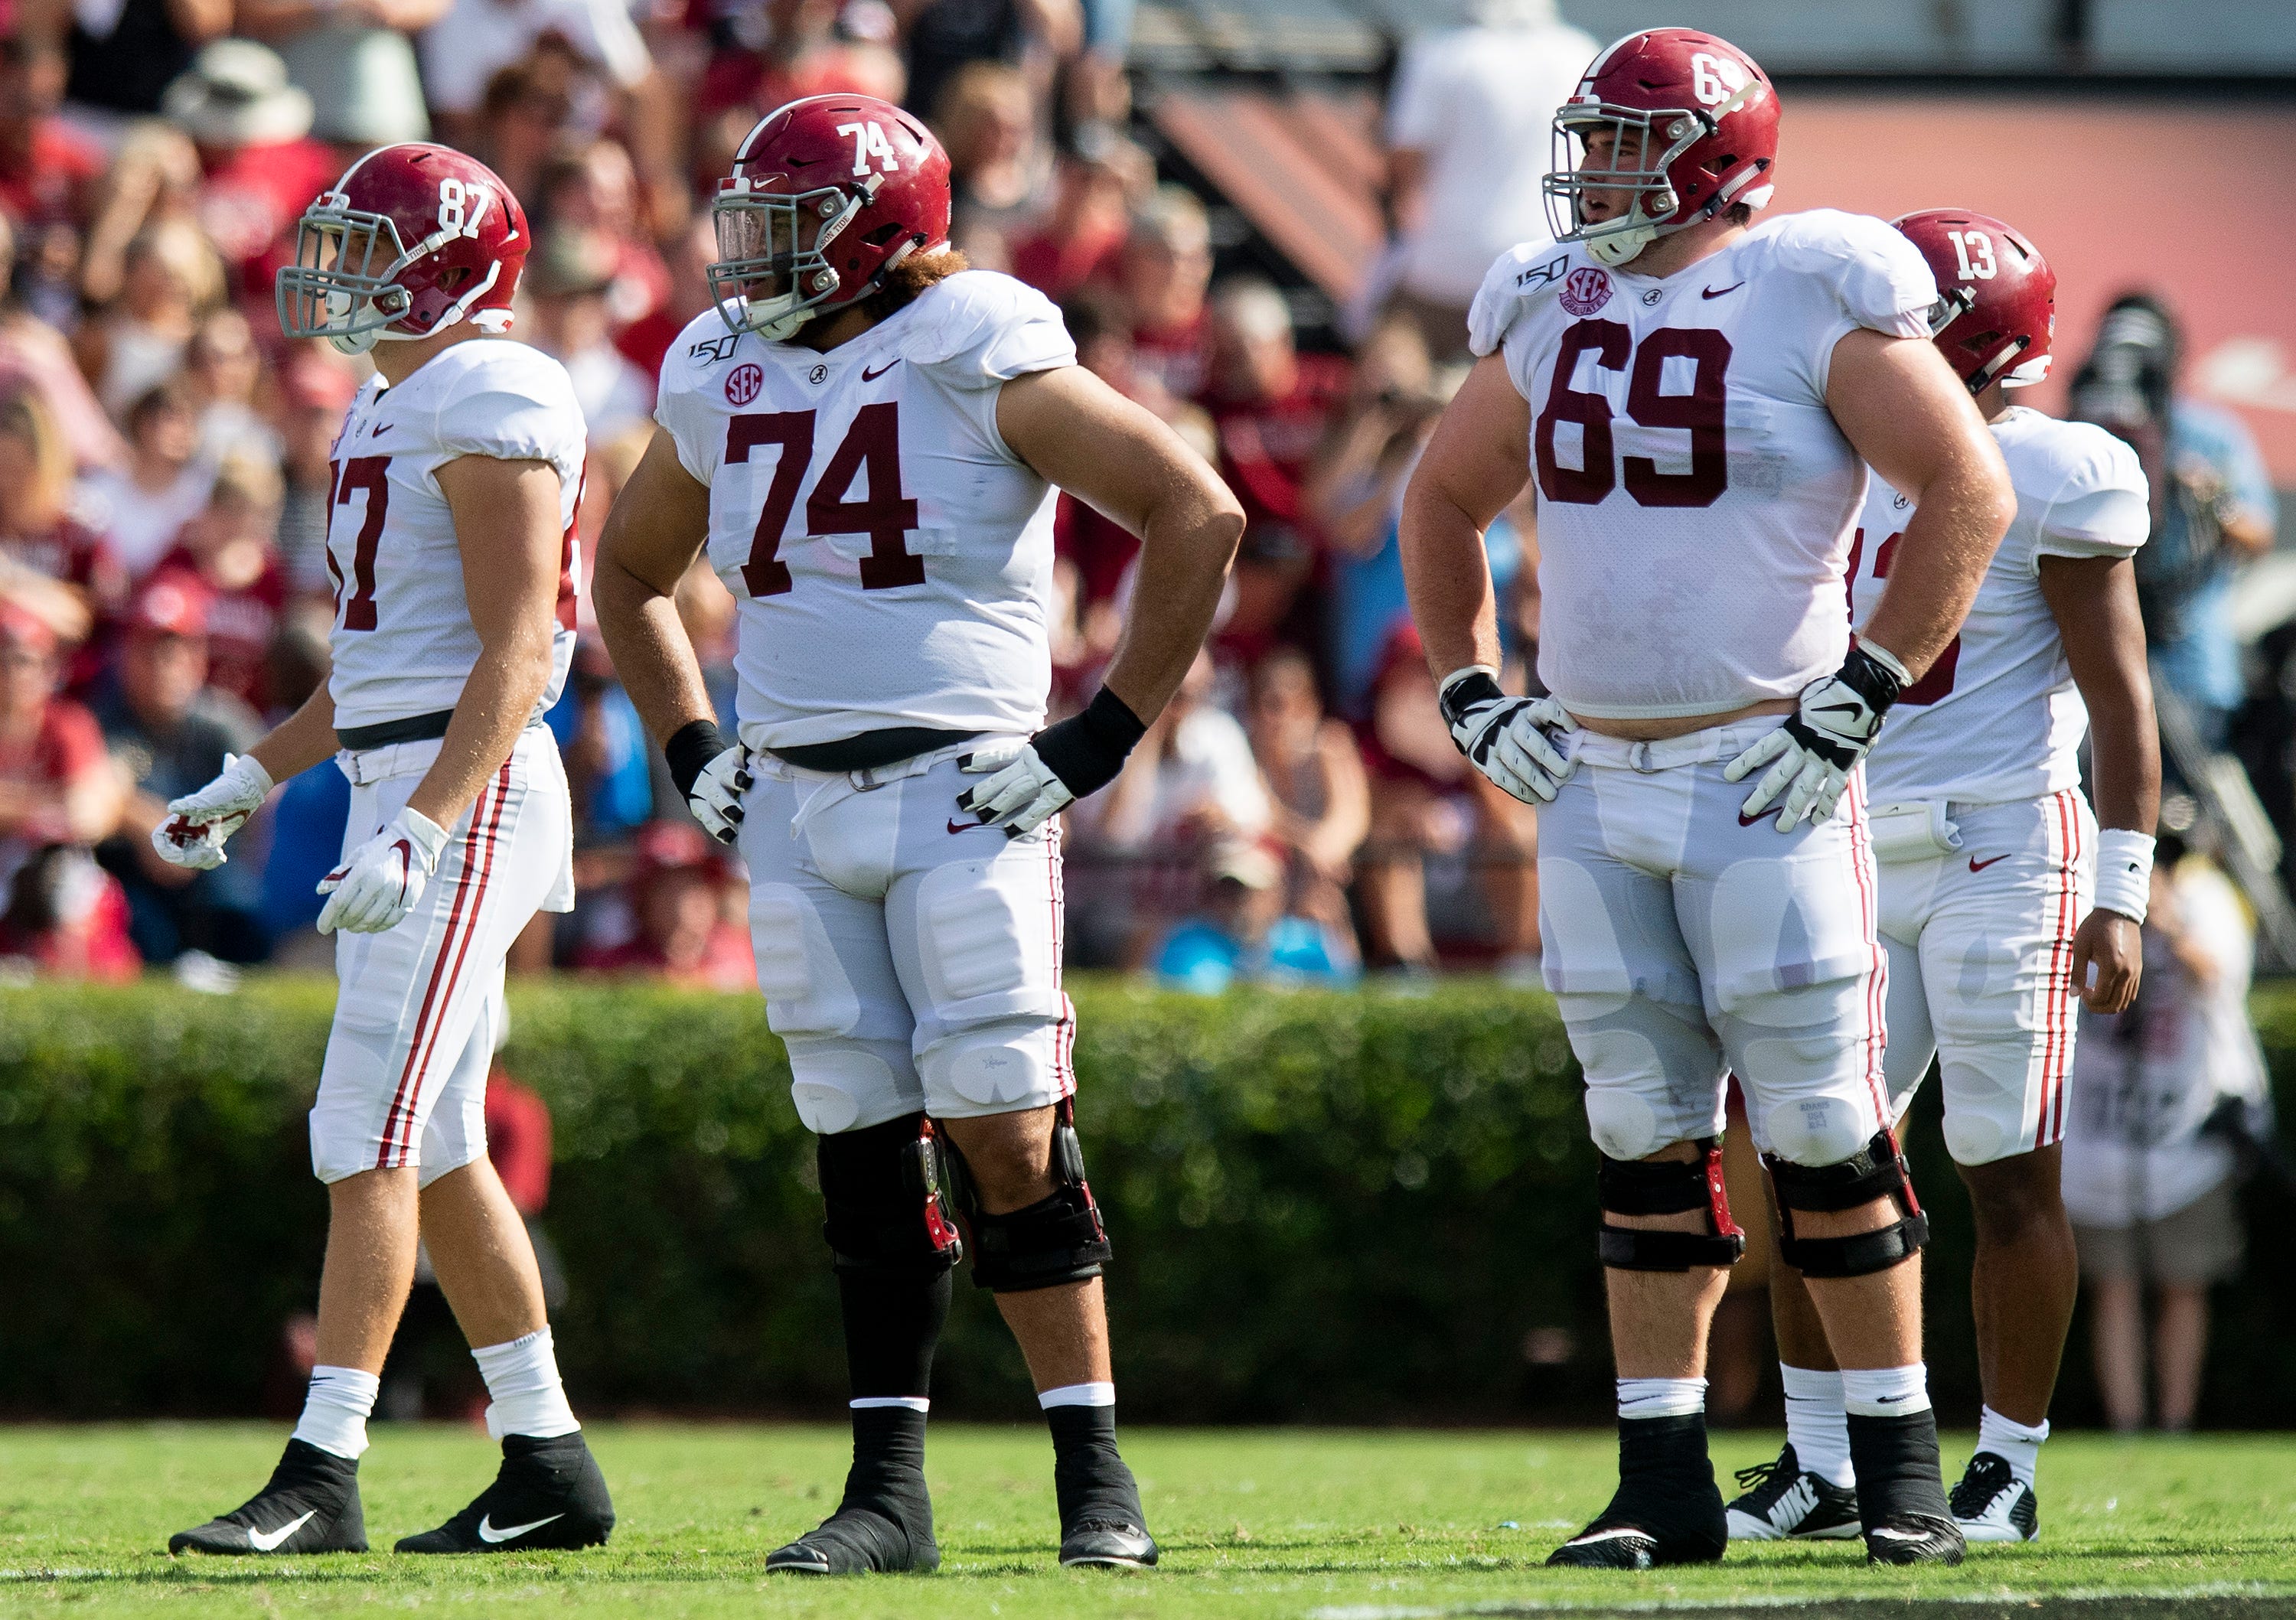 Alabama tight end Miller Forristall (87), offensive lineman Jedrick Wills, Jr., (74) and offensive lineman Landon Dickerson (69) against South Carolina at Williams-Brice Stadium in Columbia, S.C., on Saturday September 14, 2019.